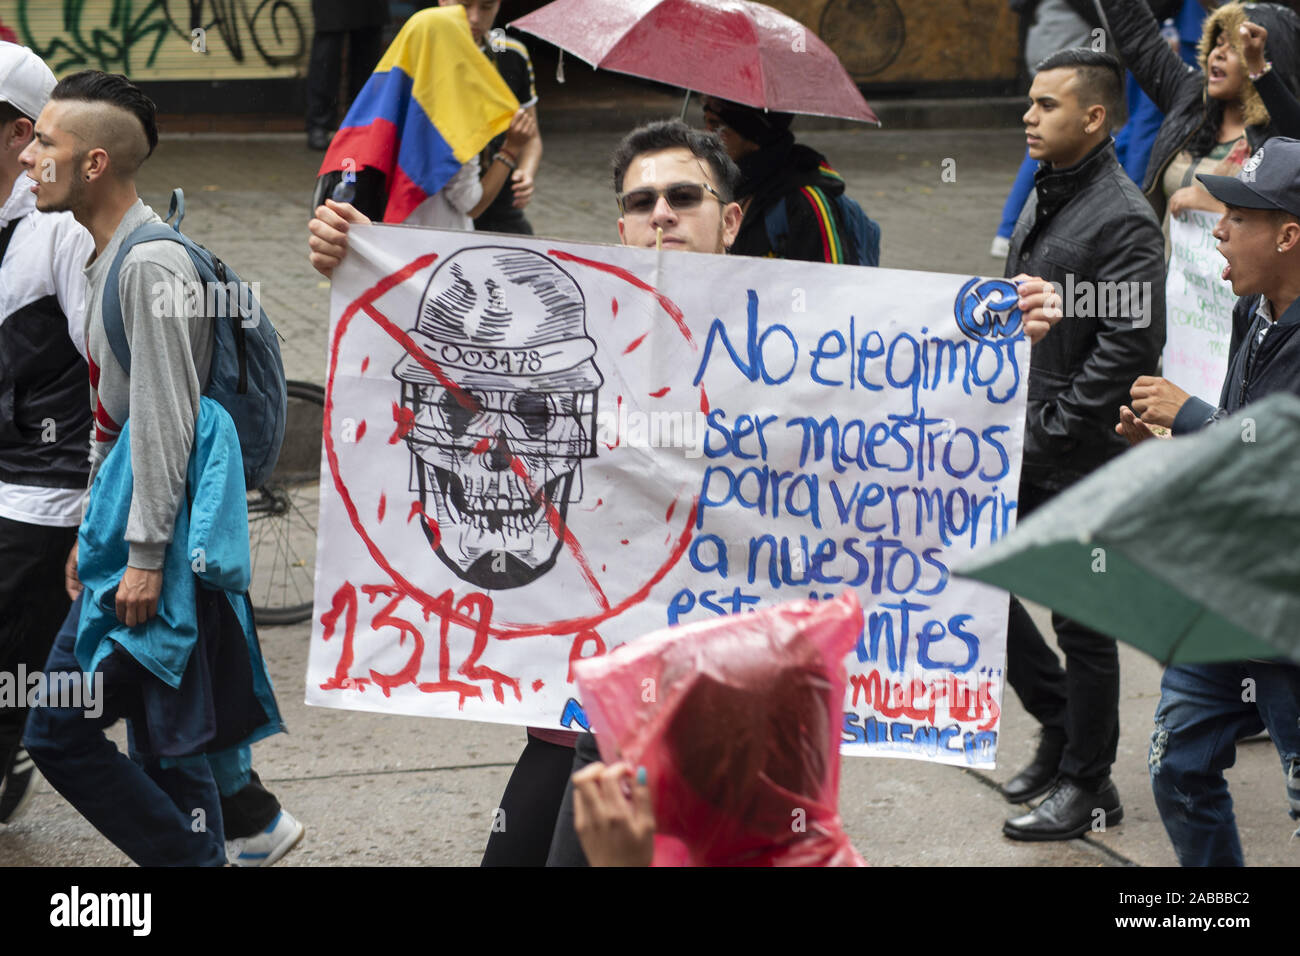 Bogota, Colombia. November 26, 2019: Protestors gather in Bogota in support of the national strike Paro Nacional. November 26th marks the 6th day of protests in the city, and one day after the first civilian death of 18 year old Dilan Cruz. Cruz was shot in the head with a projectile by National Police's anti-riot squad on the corner of Calle 19 with Carrera 4. Credit: Giles Campbell/ZUMA Wire/Alamy Live News Credit: ZUMA Press, Inc./Alamy Live News Stock Photo